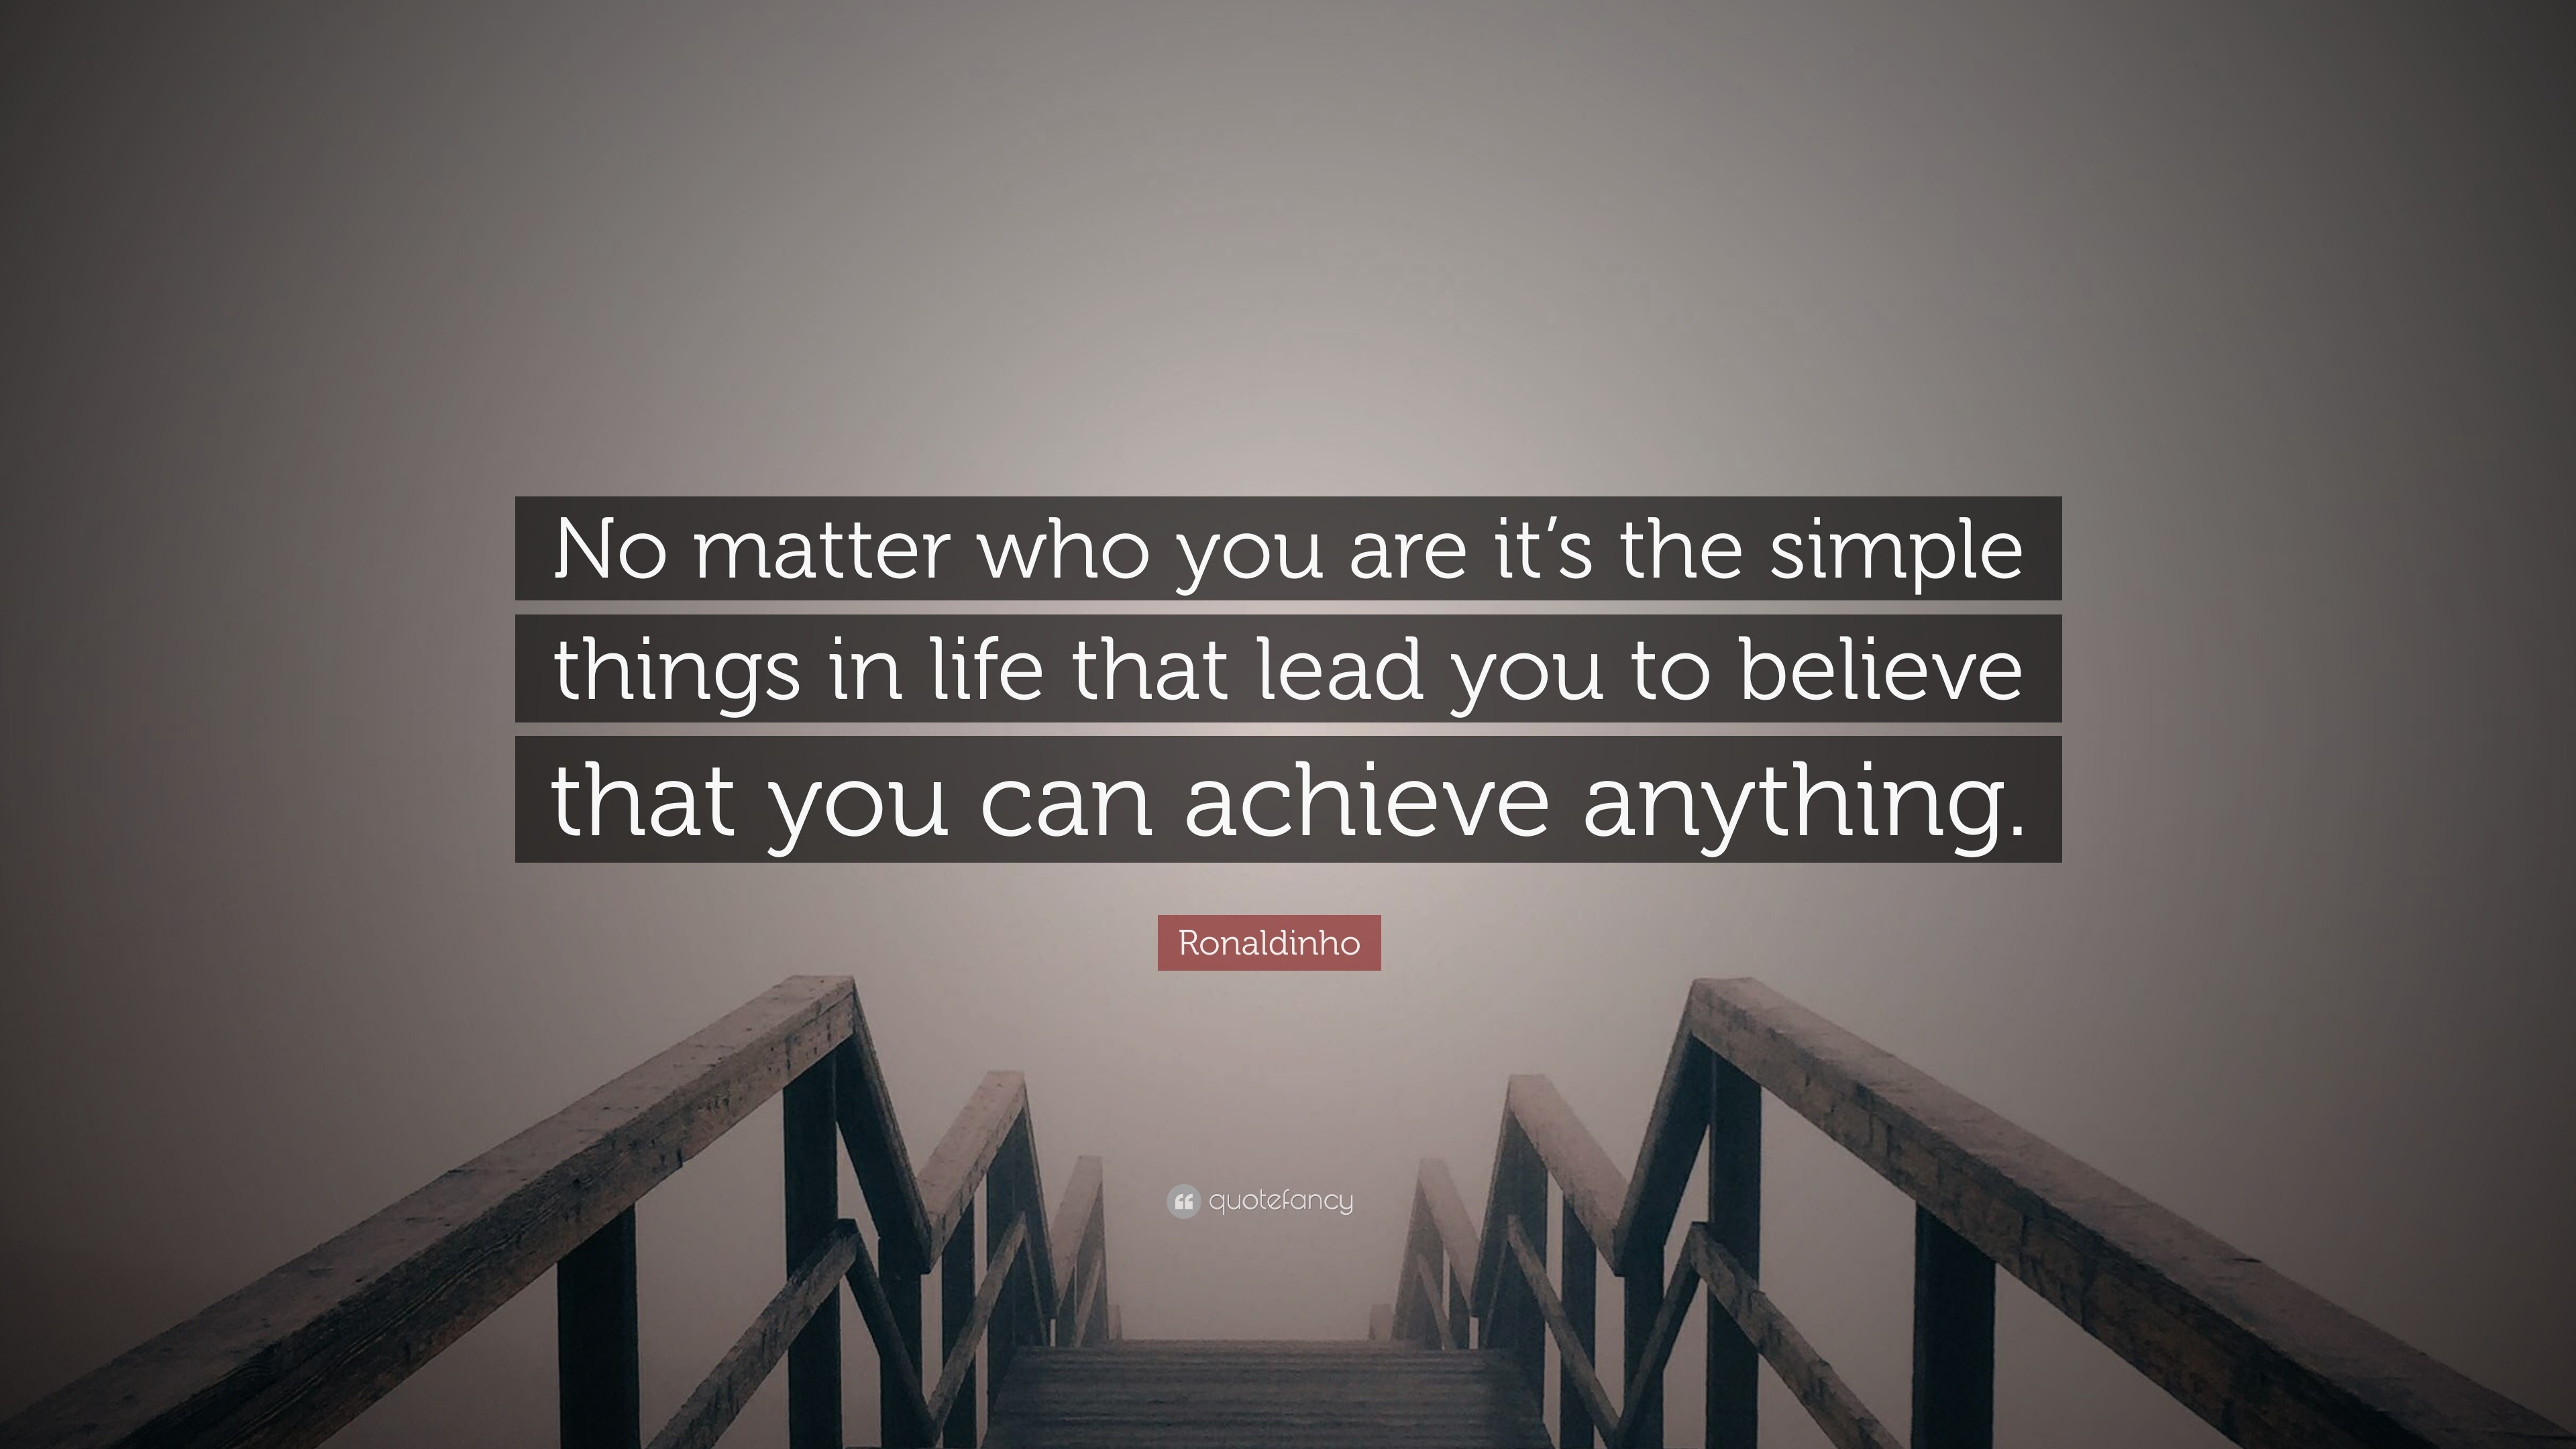 Ronaldinho Quote “No matter who you are it s the simple things in life that